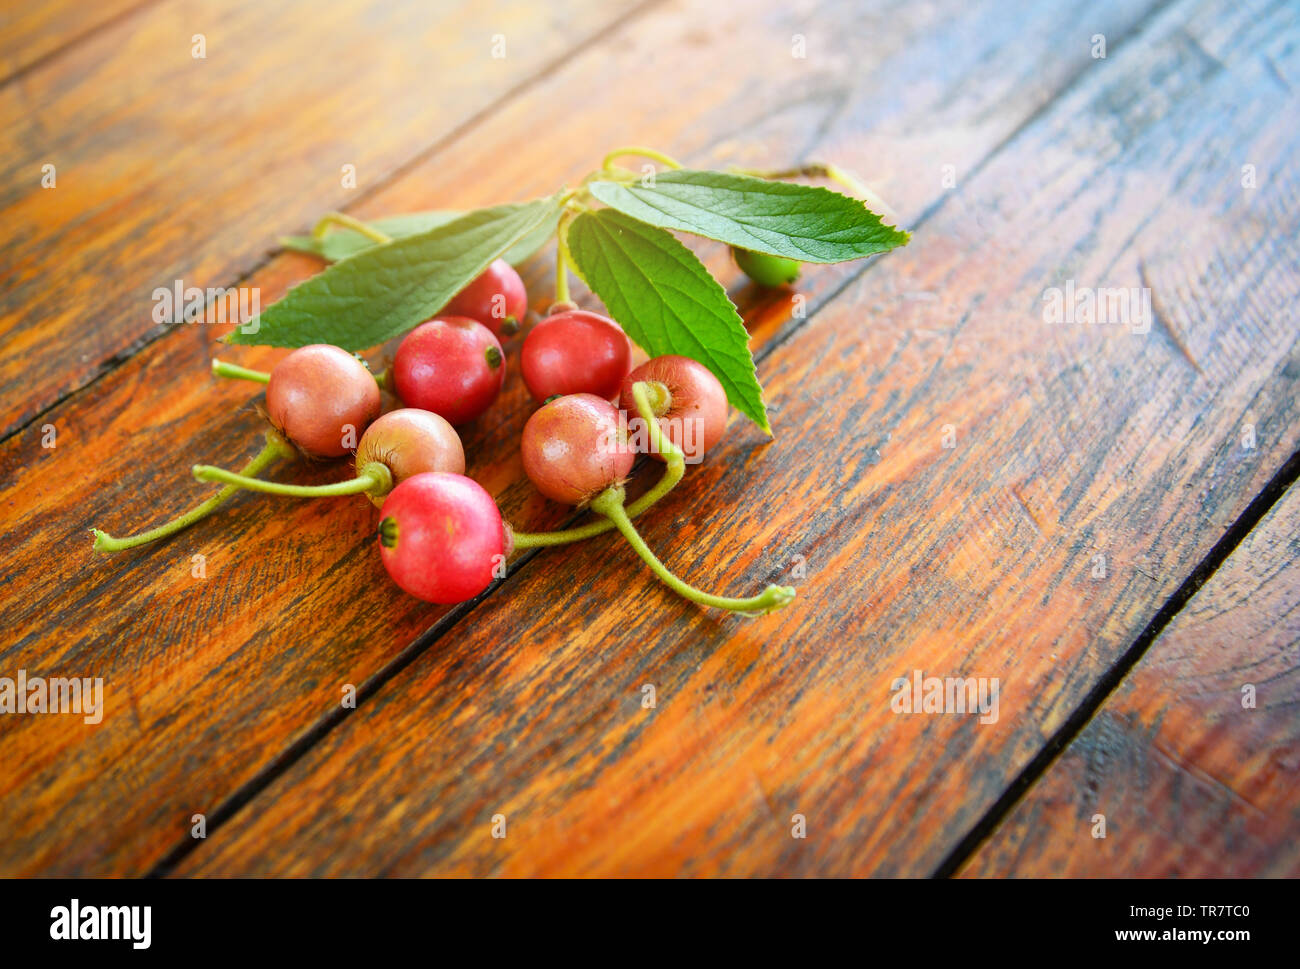 Jamaican cherry fruit and leaf on wooden background / local fruit in asia other names Malayan Cherry Calabura jam tree Stock Photo